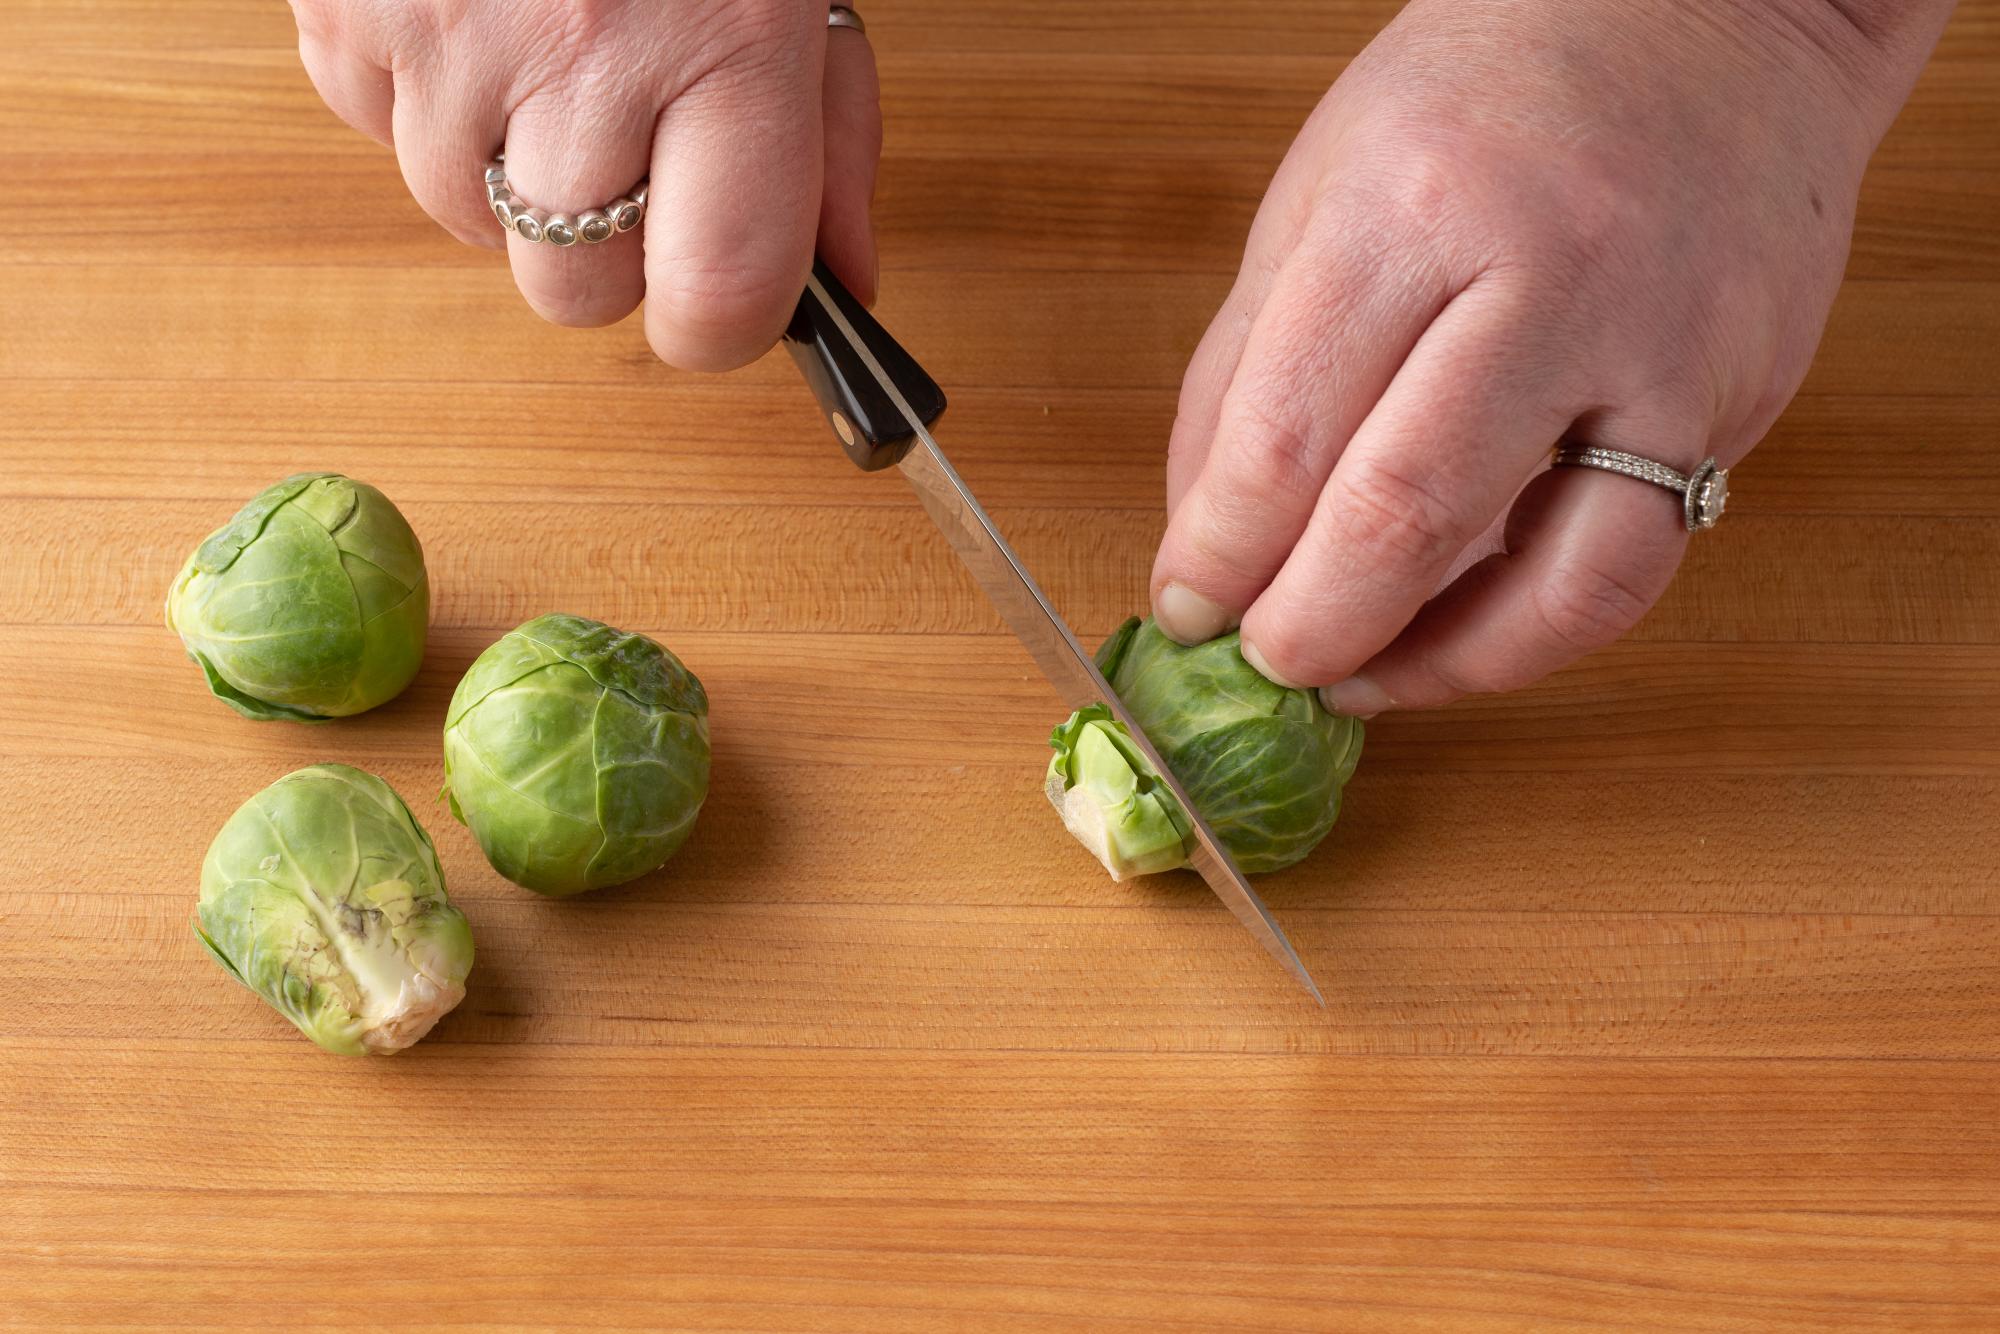 Use the Gourmet Paring Knife to trim the ends off the Brussel sprouts.